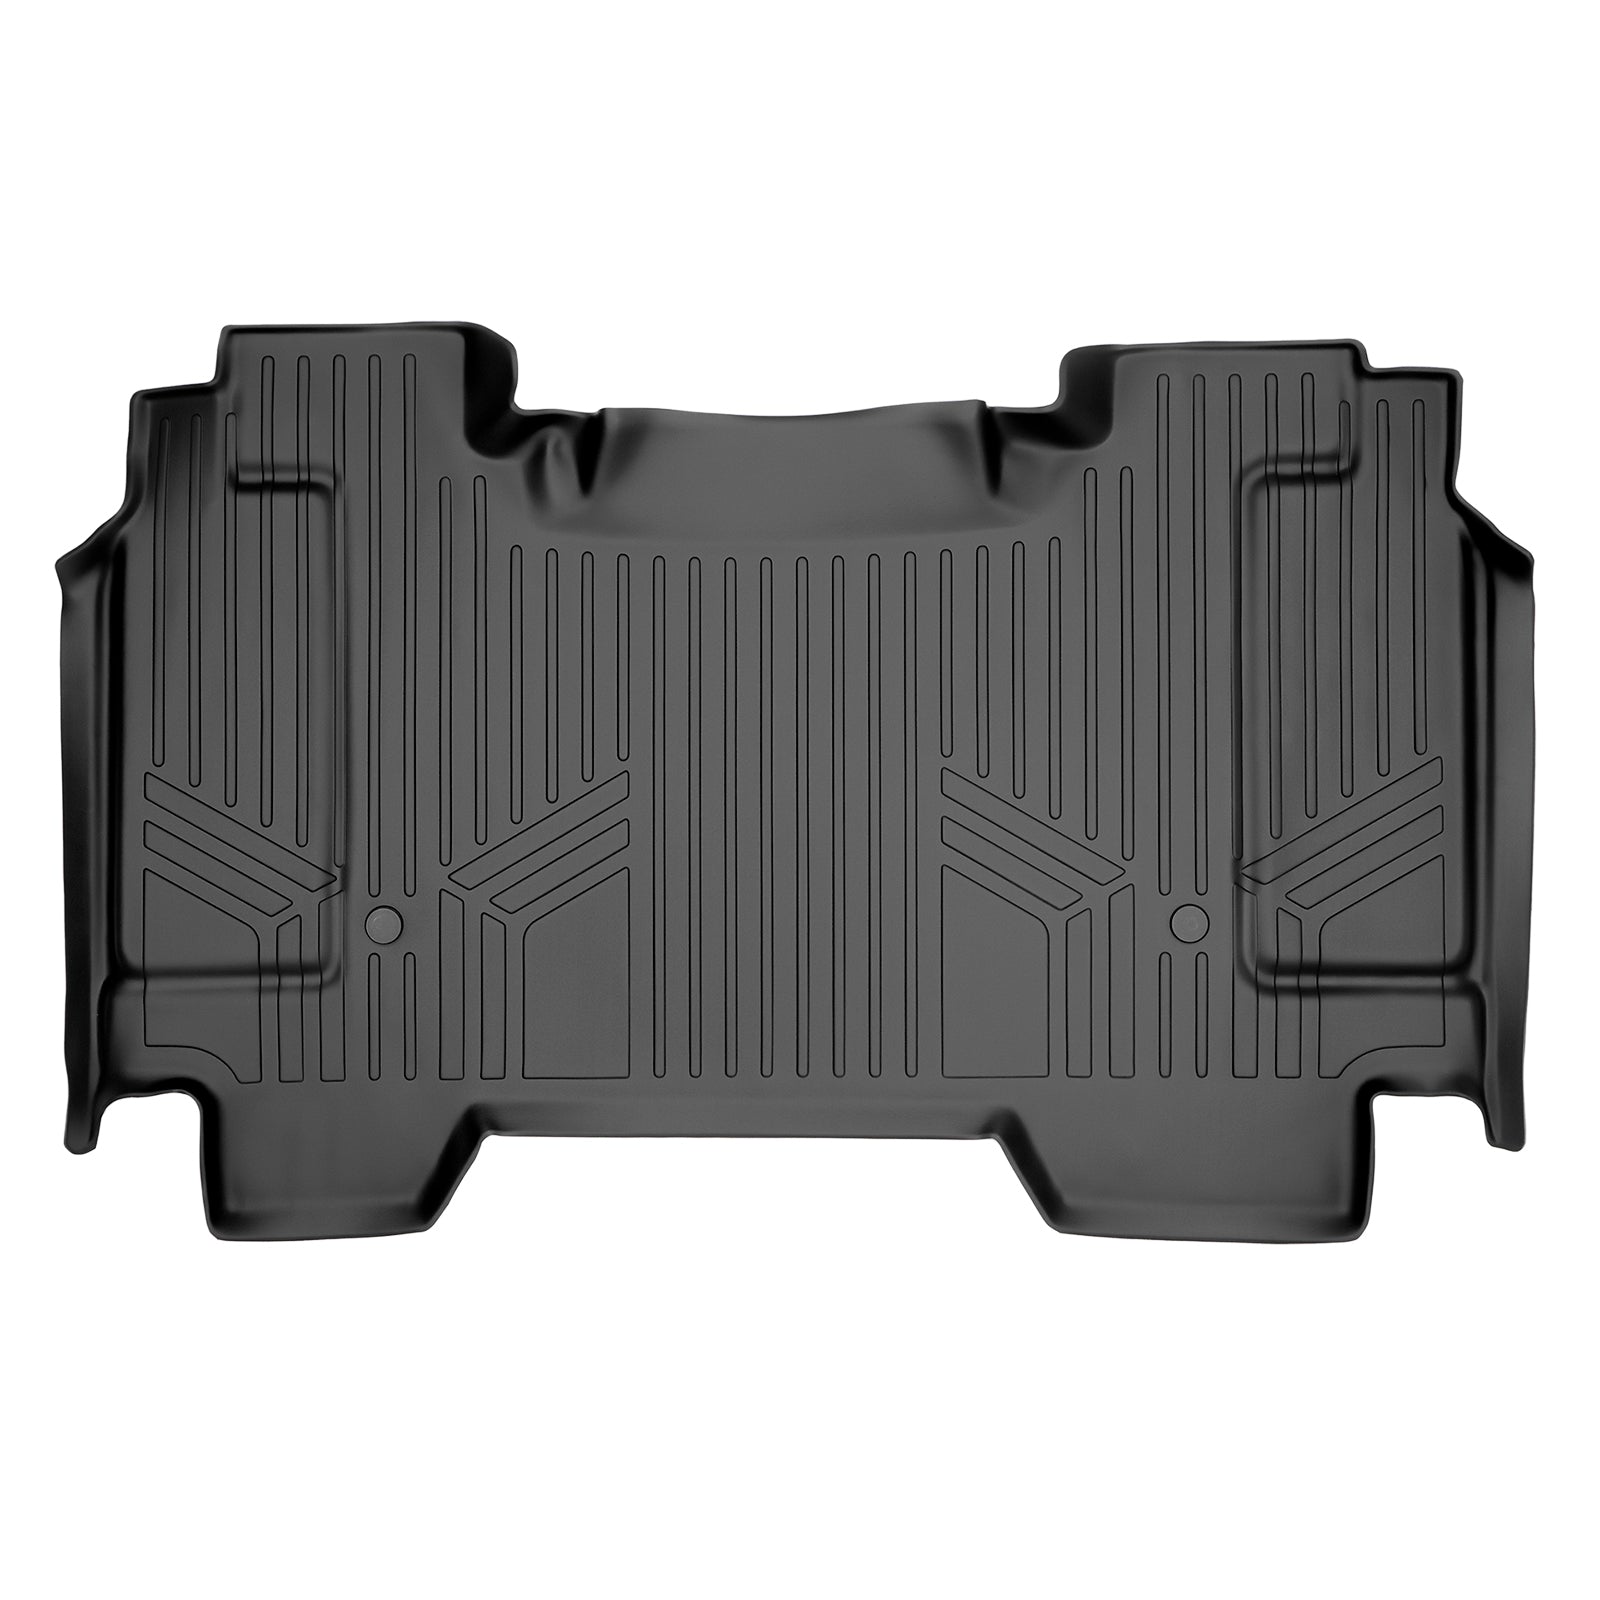 SMARTLINER Custom Fit for 2020 Ram 1500 Crew Cab without Rear Underseat Storage Box - Smartliner USA